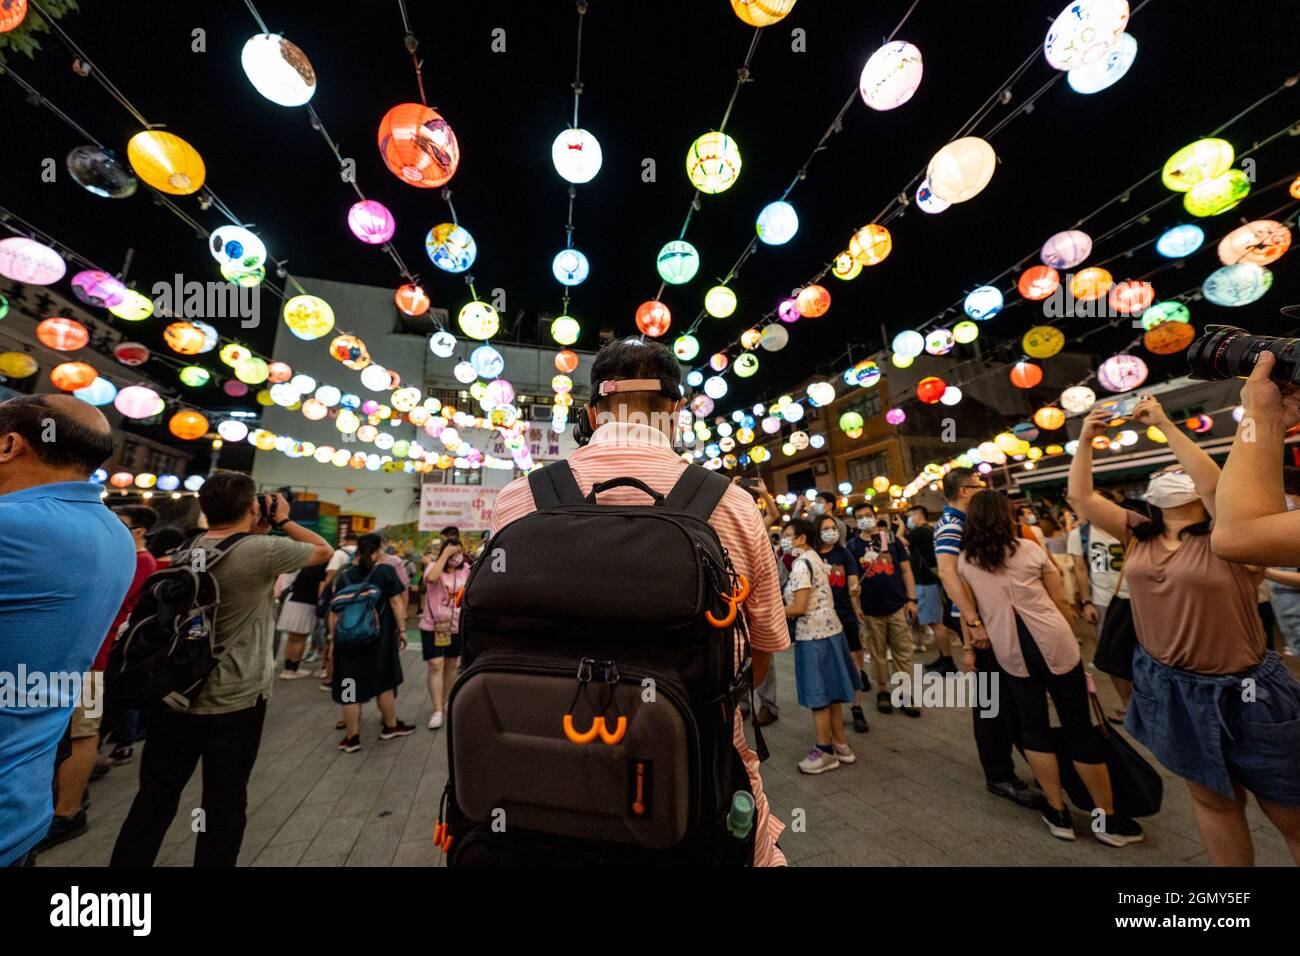 Hong Kong, China. 20th Sep, 2021. People take photos of lanterns and light  decorations set up for Mid-Autumn Festival.Tai O, a small fishing village  in Hong Kong, annually decorates the area with